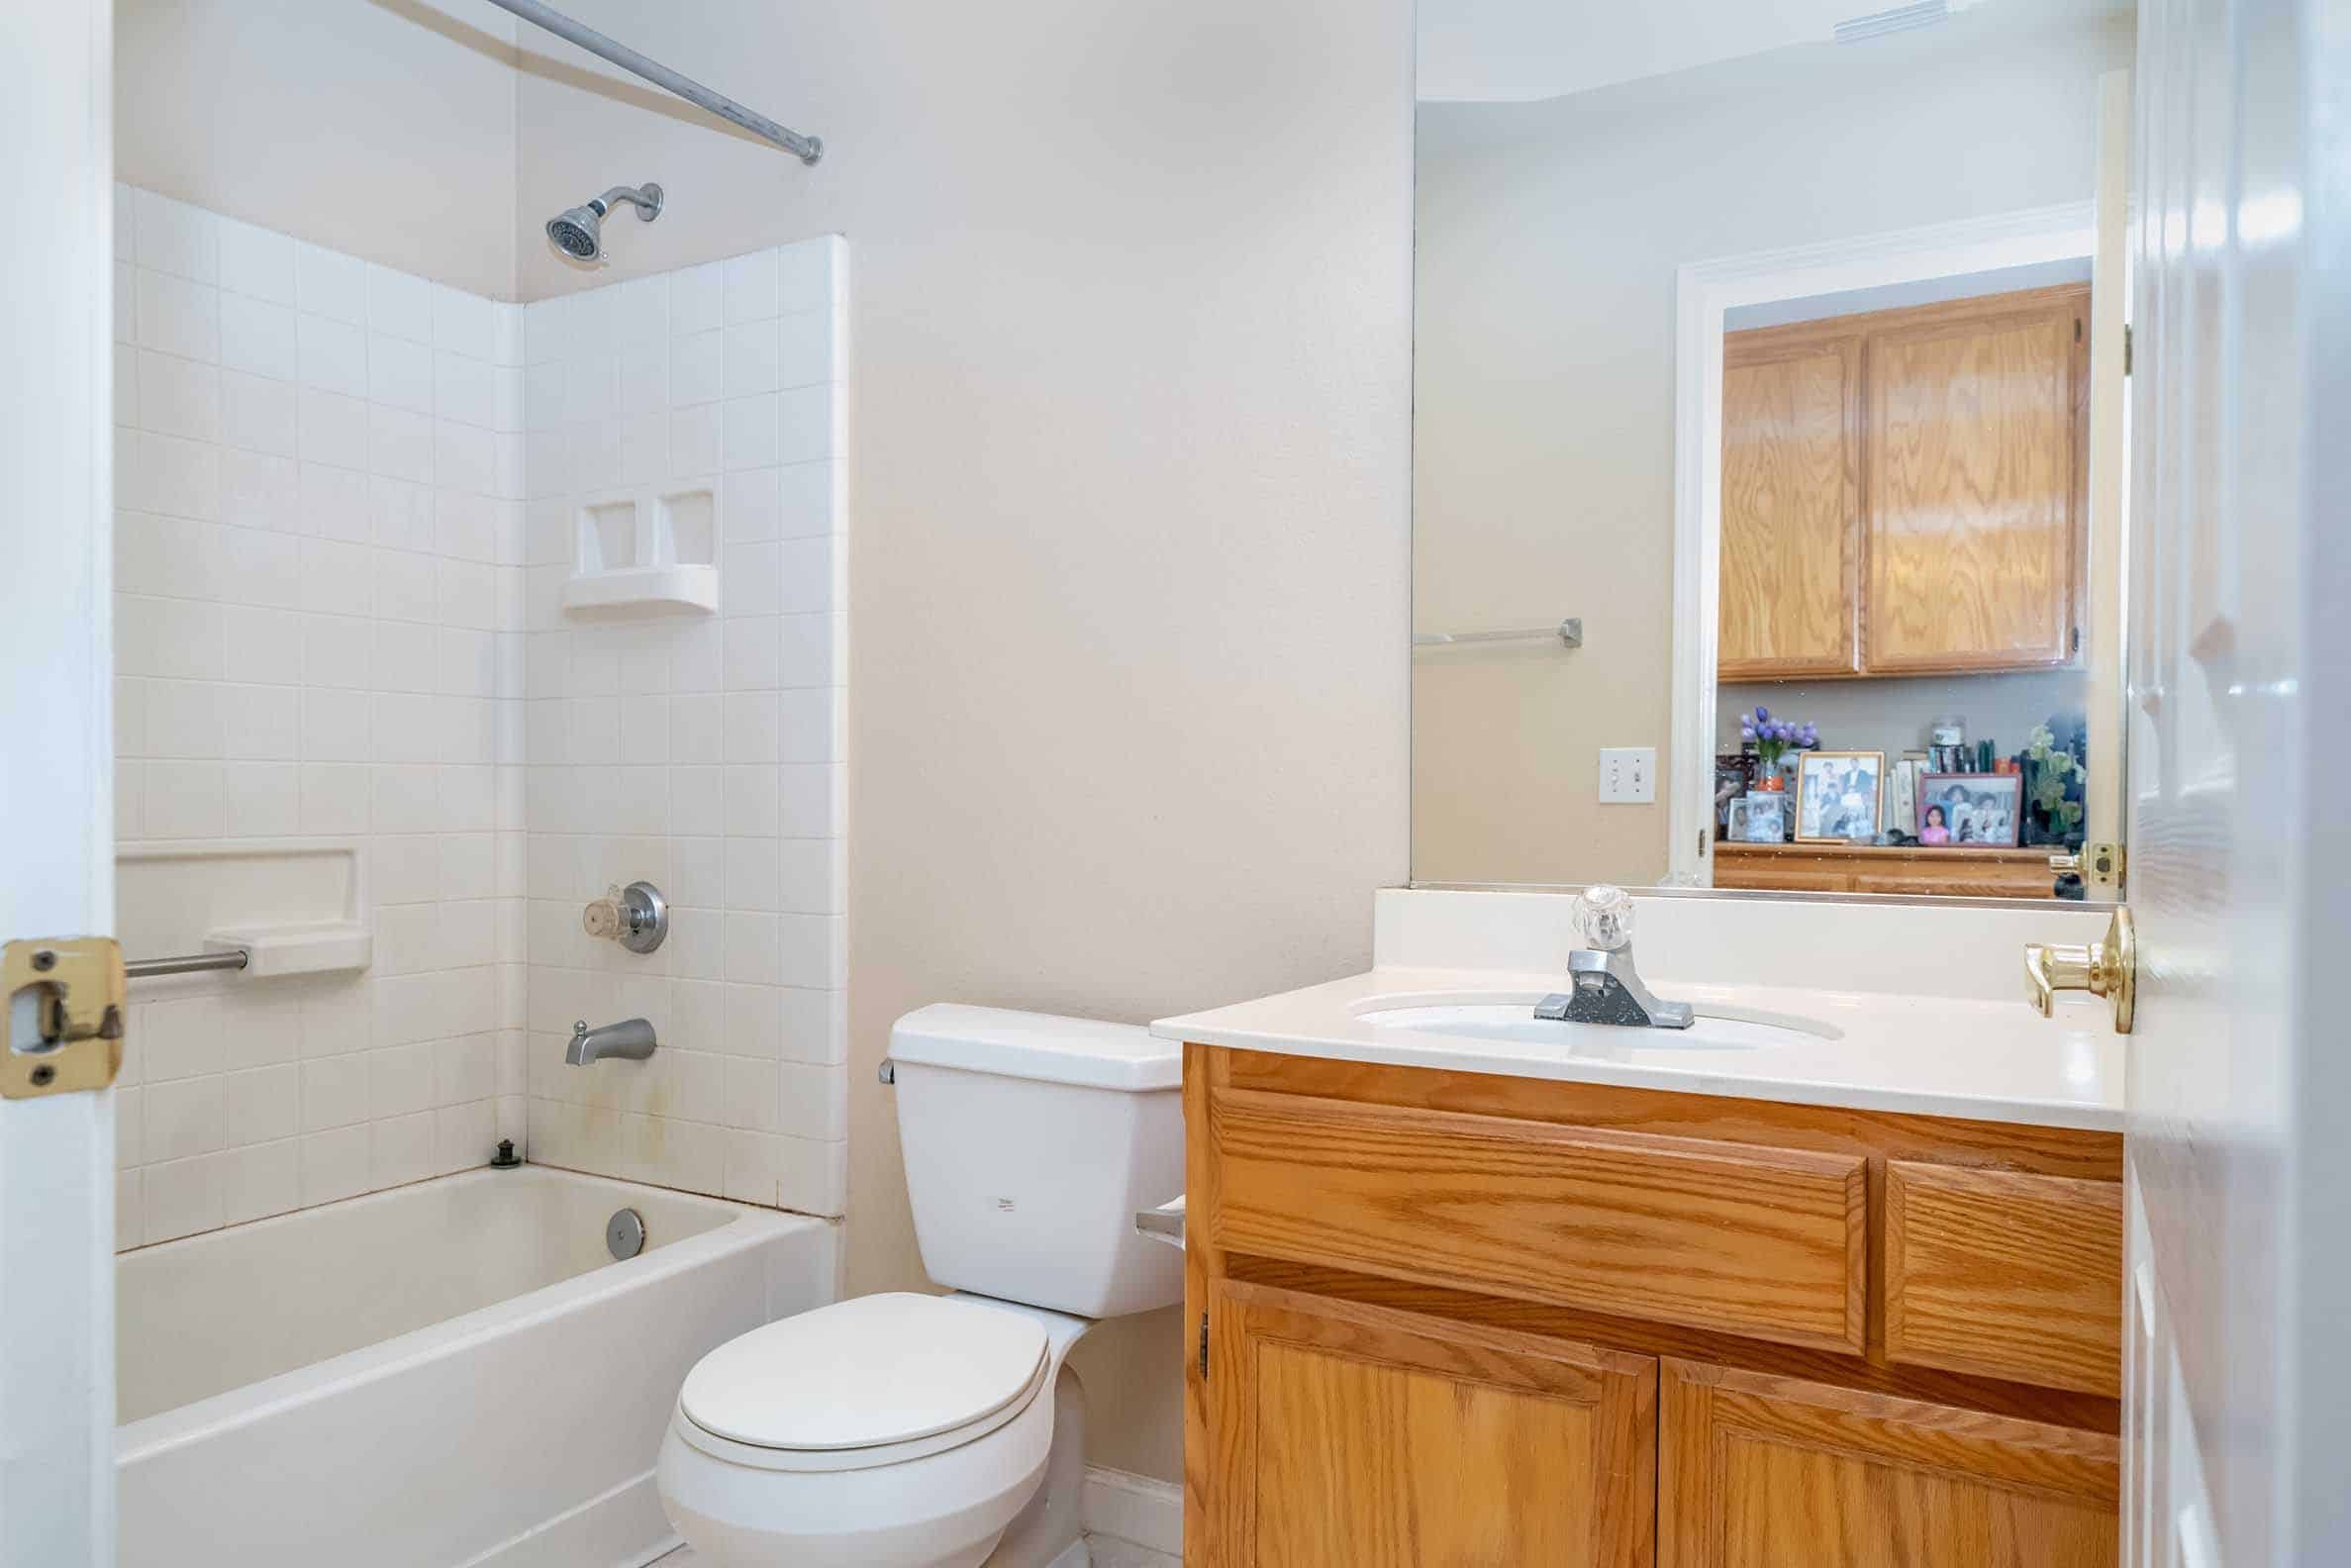 Bathroom Before Remodeling by Luxehome Construction Inc in Elk Grove, CA 95624